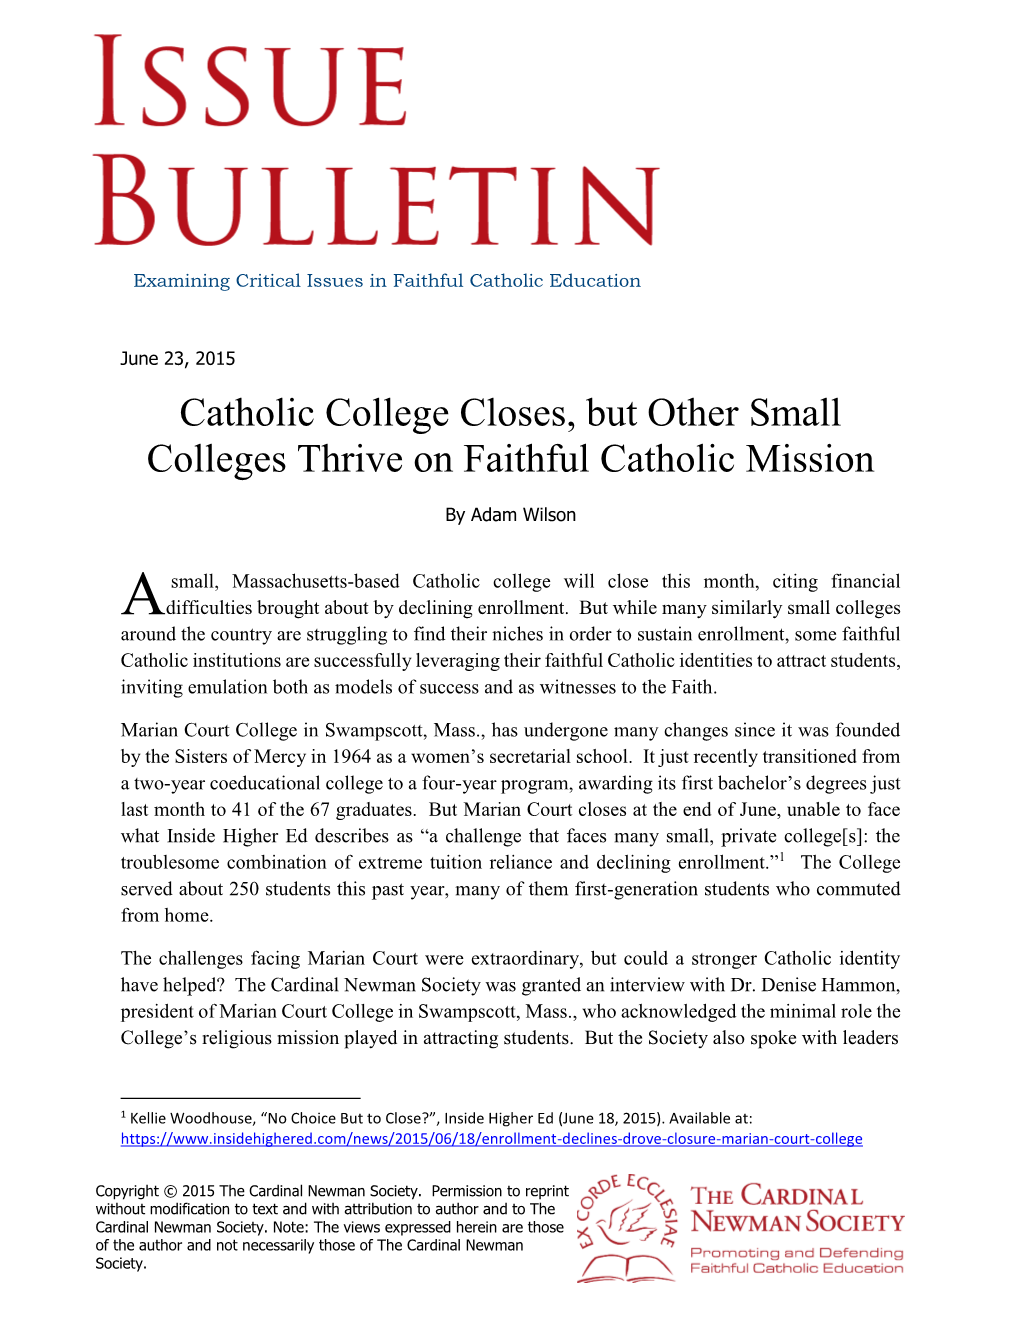 Catholic College Closes, but Other Small Colleges Thrive on Faithful Catholic Mission